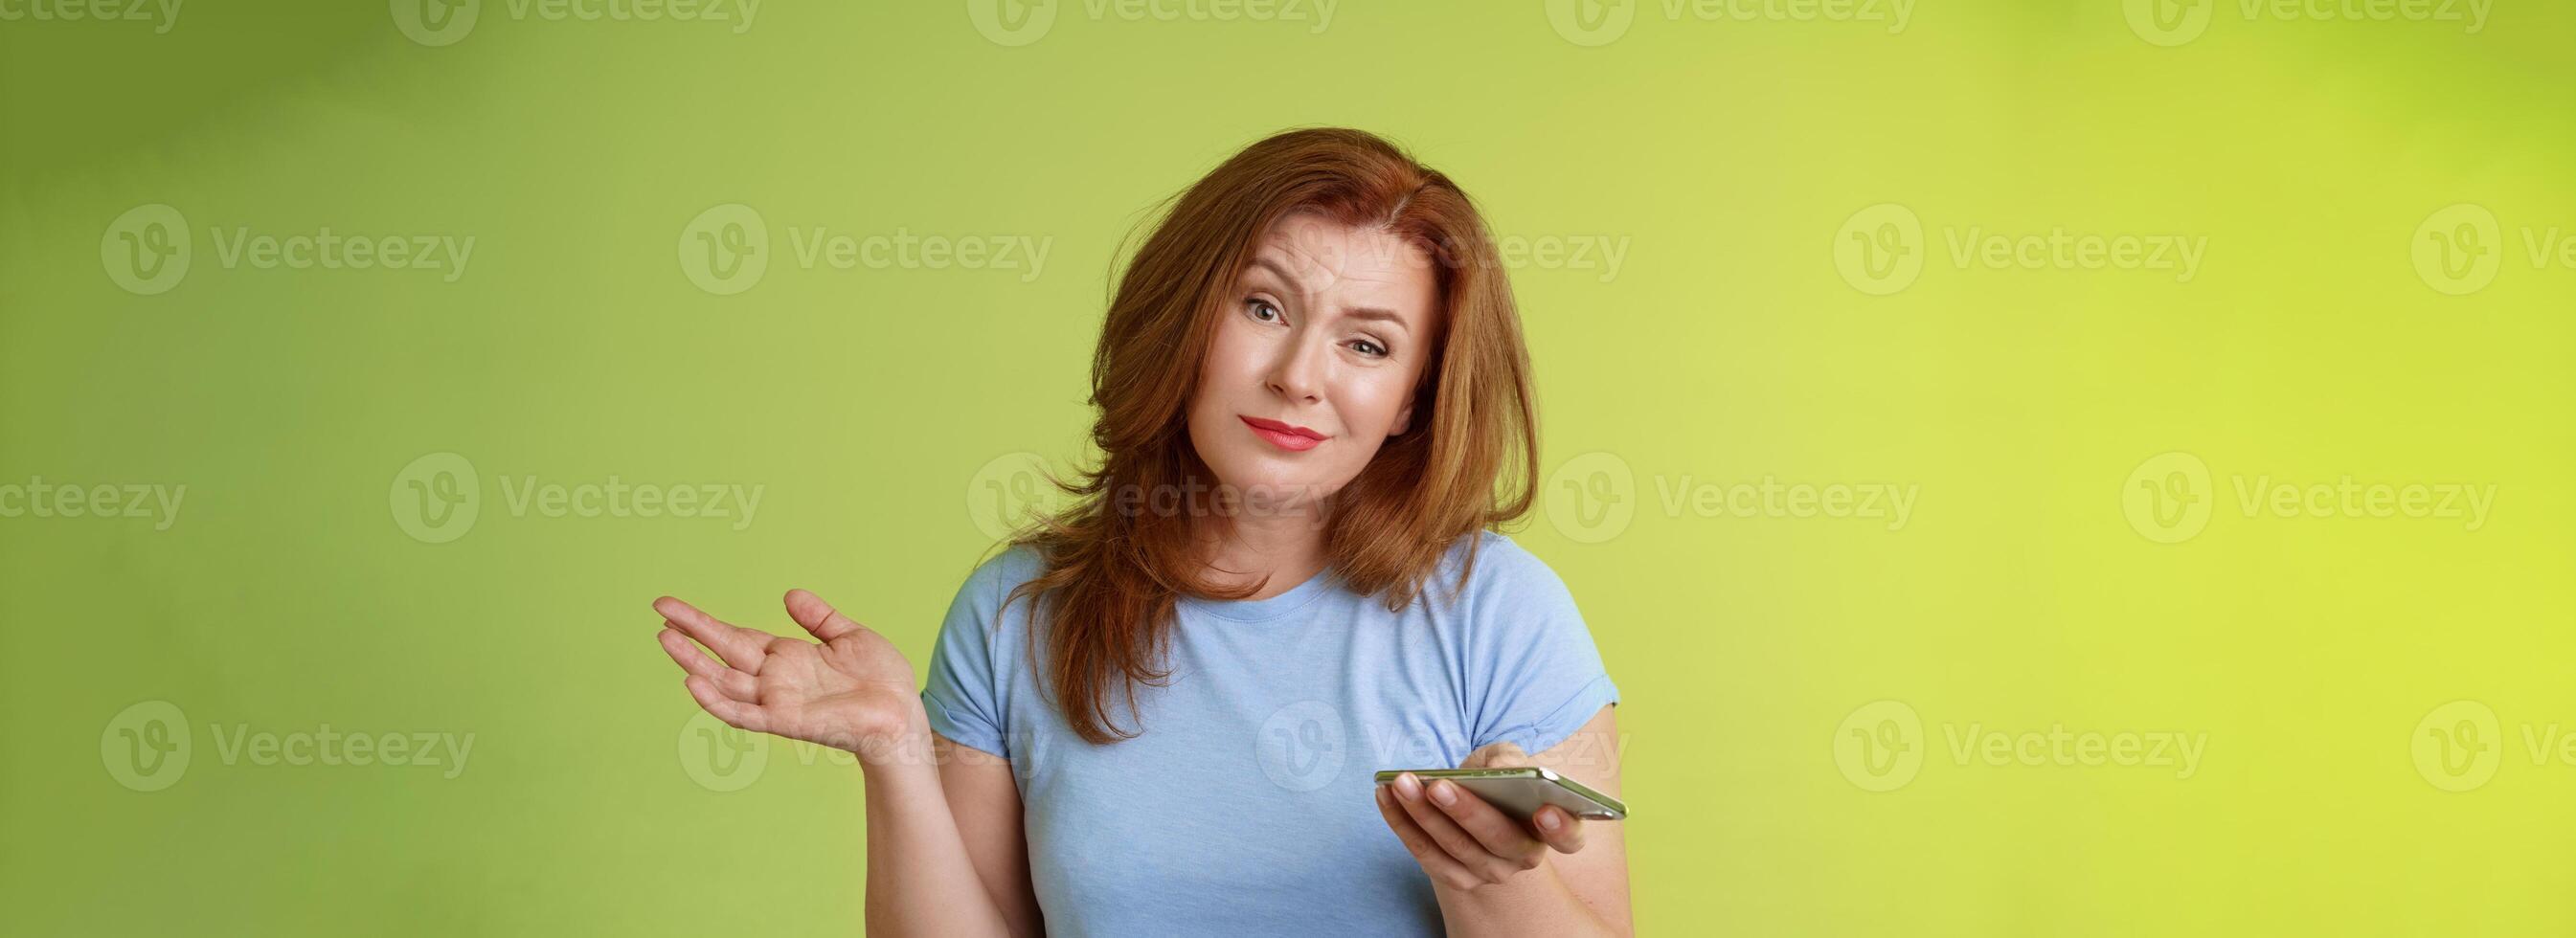 Well meh. Indifferent careless hesitant redhead middle-aged woman mature red female shrugging hold smartphone smirk bored uninterested hold hand aside apathetic attitude green background photo